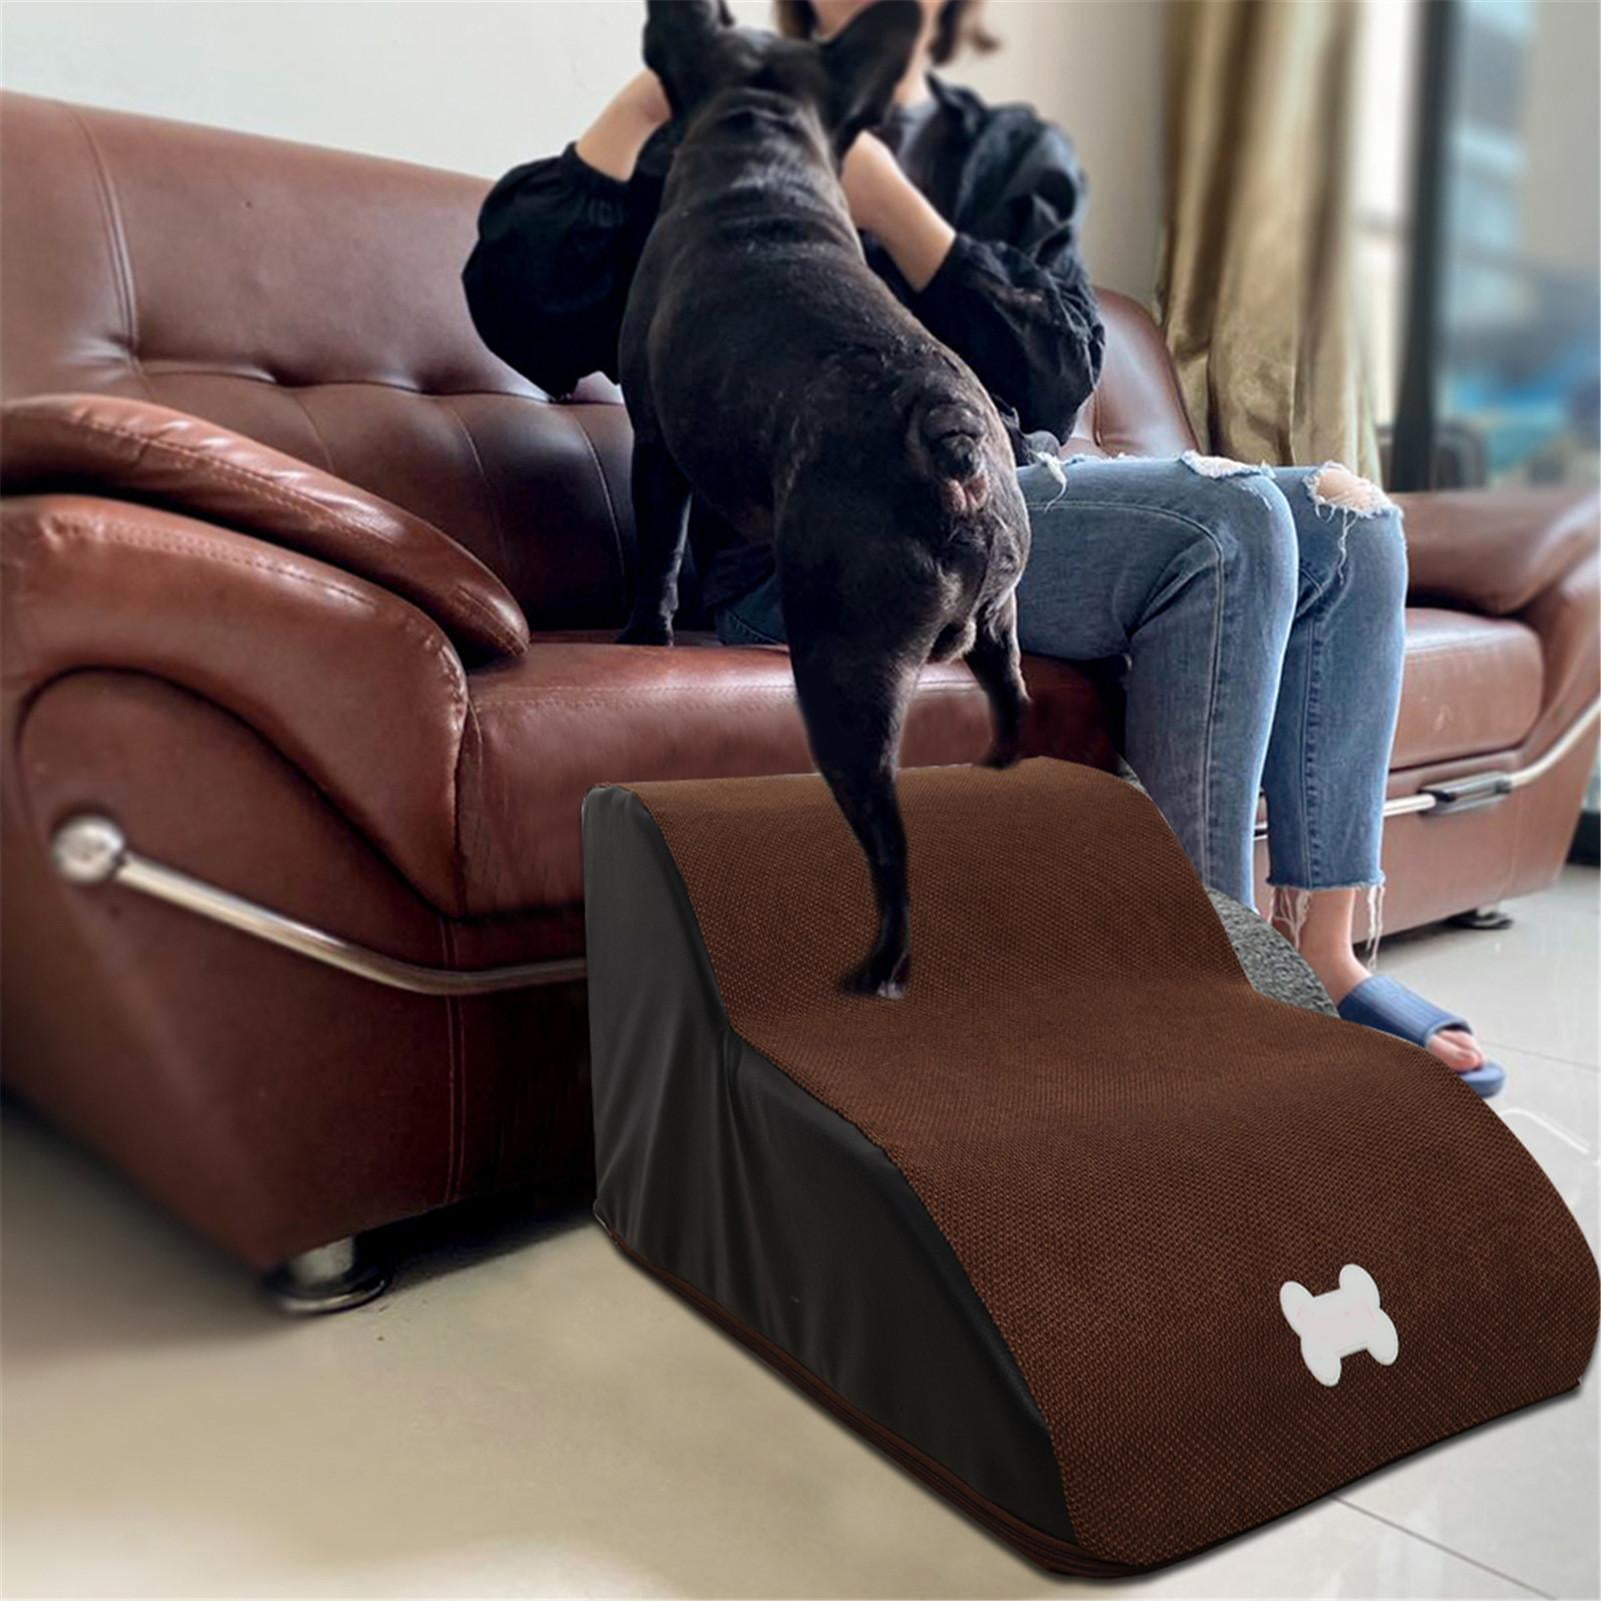 Pet Slope Dog Stairs Ladder Pet Stairs Step Pet 4 Layers Step Non-Slip Dog Stairs Sofa Bed Ladder for Dogs Cats Telescopic Dog Ramp 